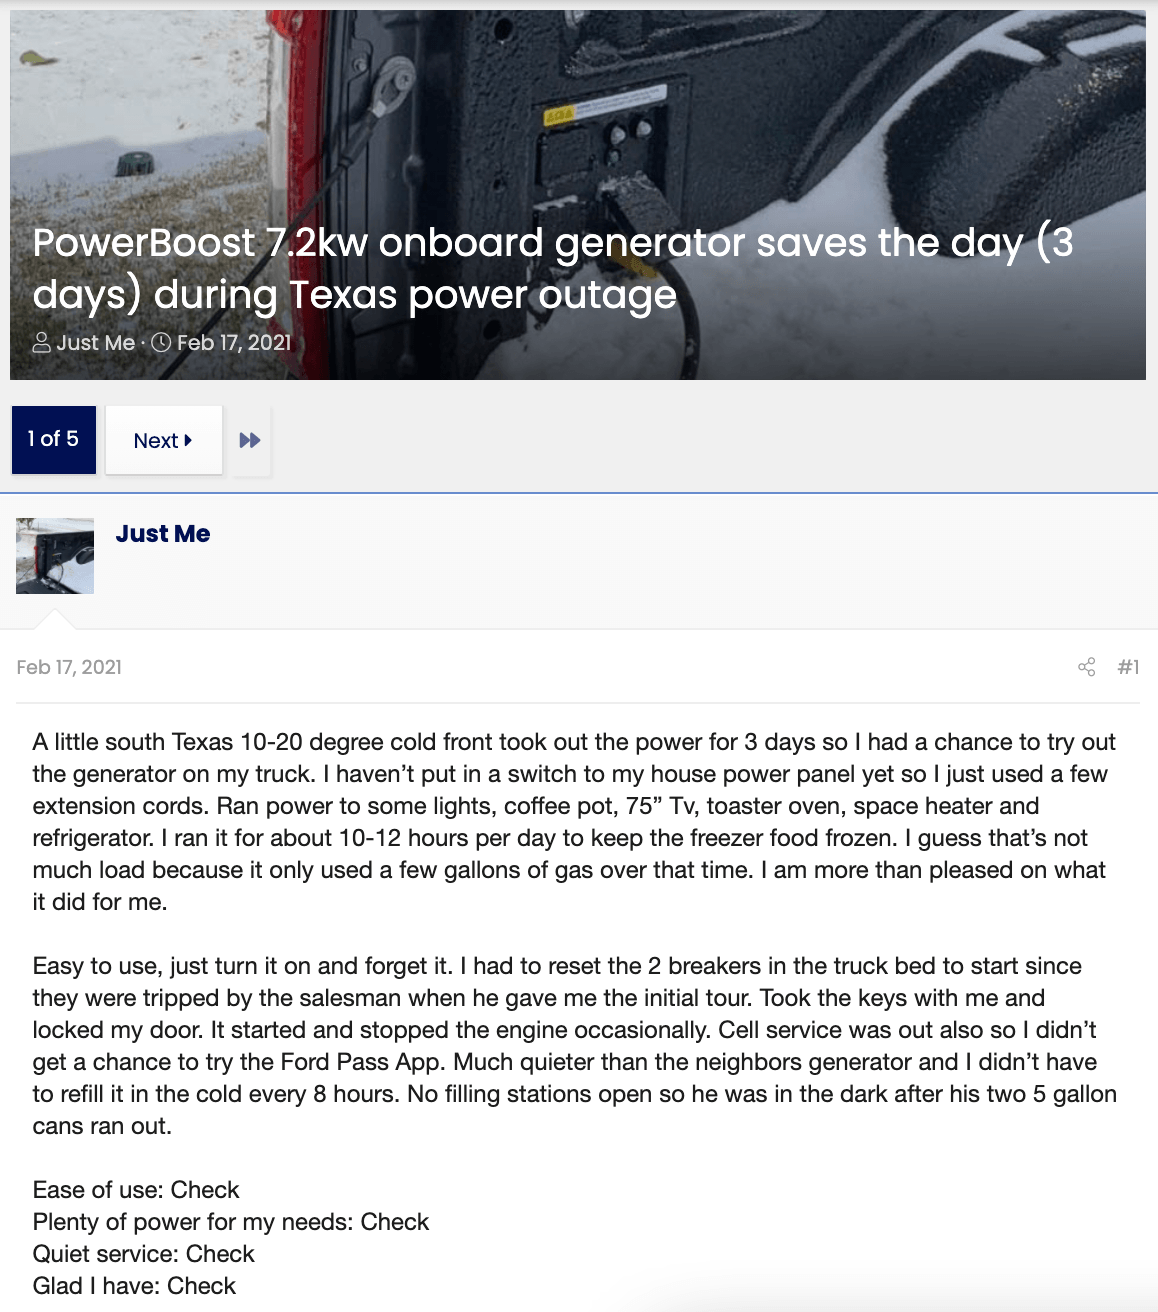 Screenshot of a story talking about Ford's F-150 generator helping during the Texas ice storms